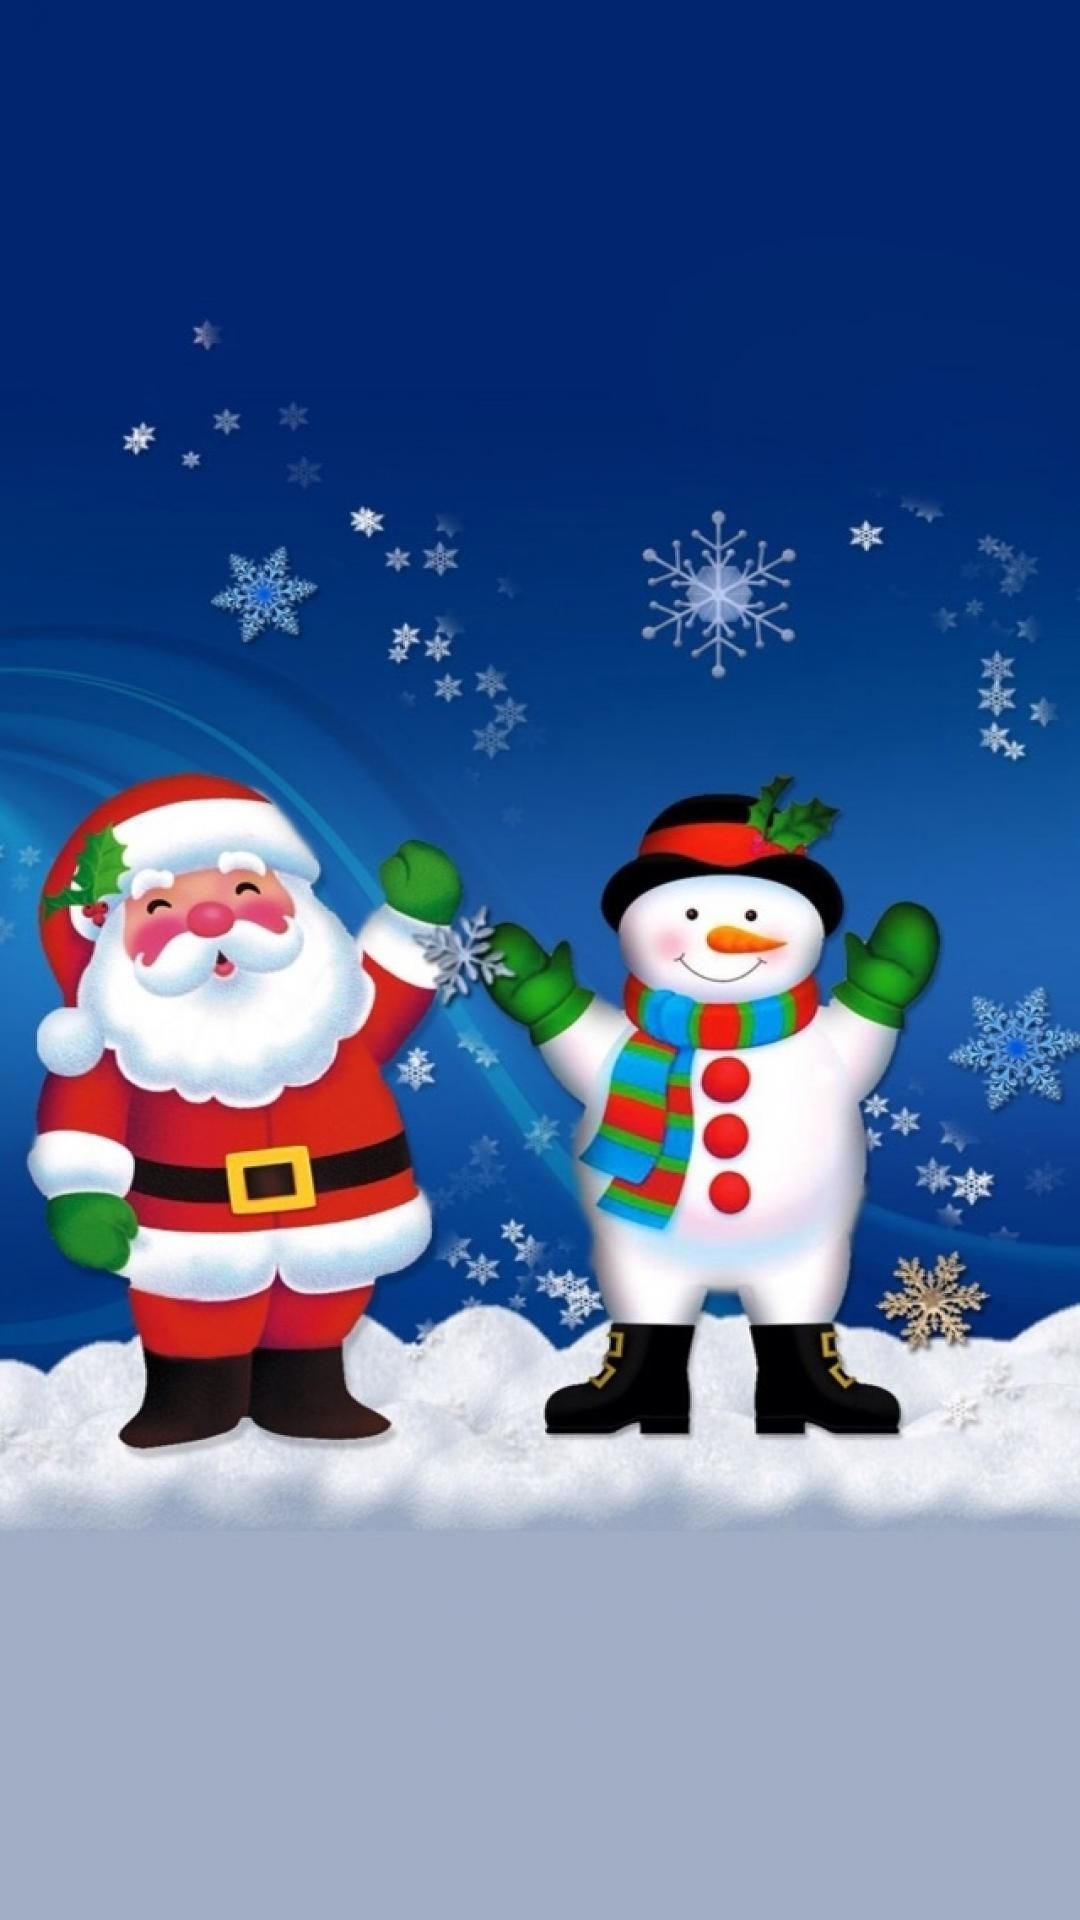 Merry Christmas Santa Claus And Snowman iPhone Plus